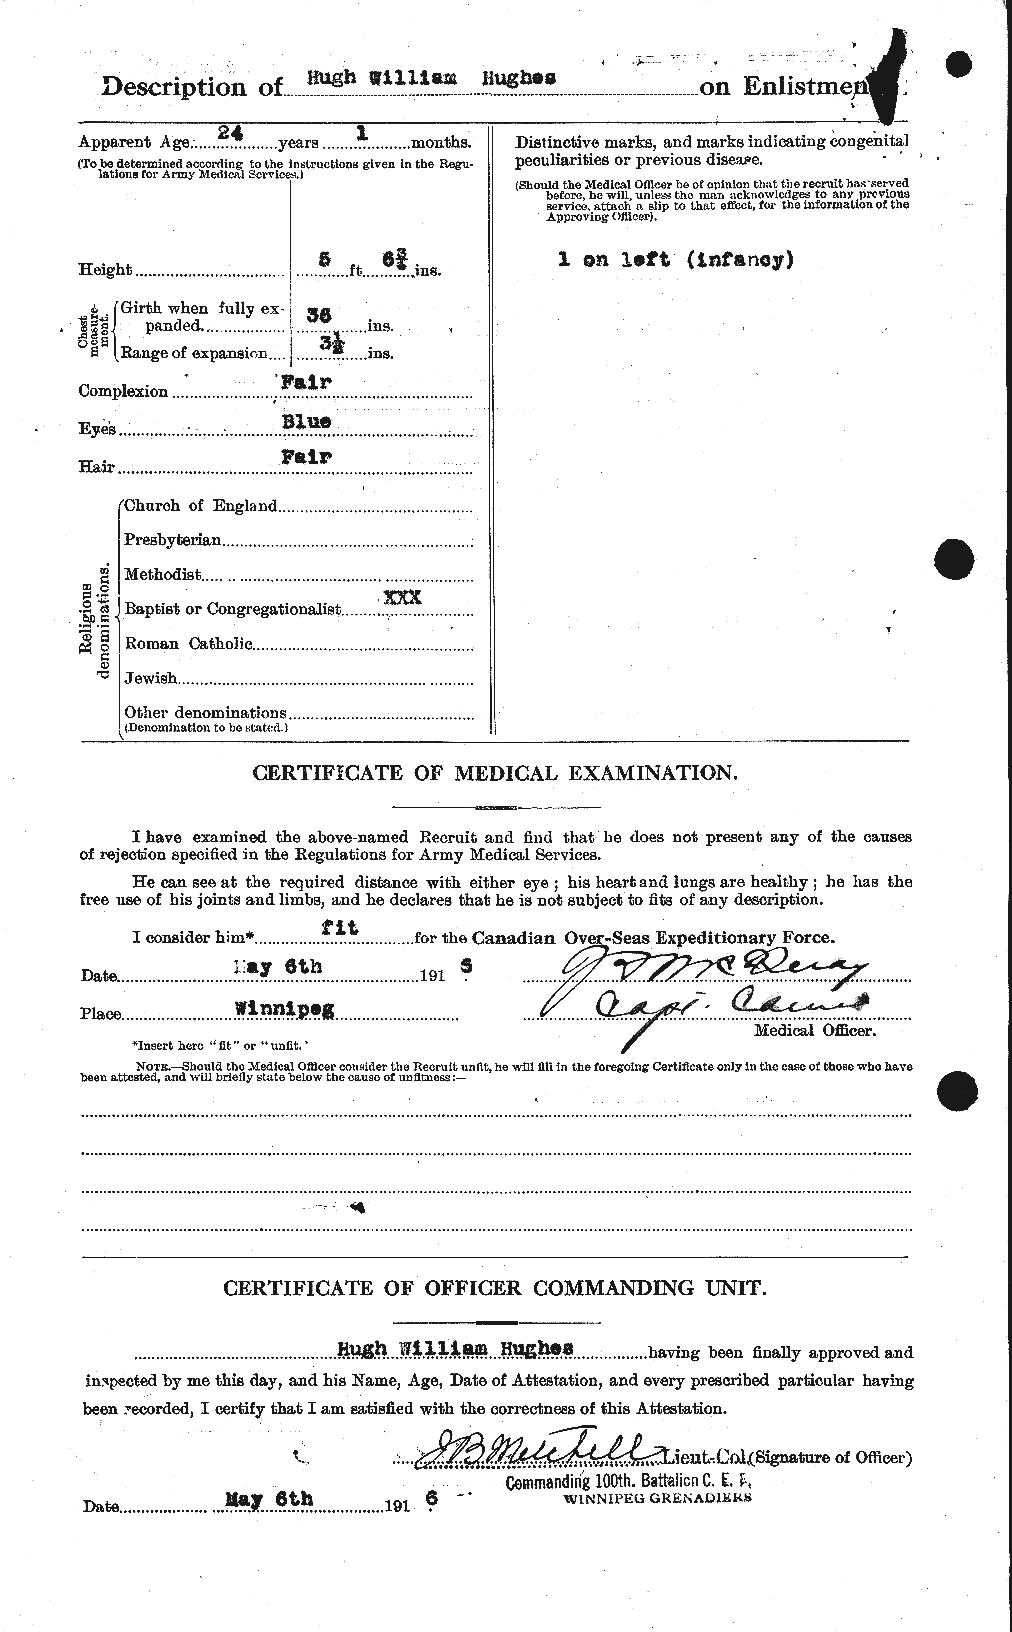 Personnel Records of the First World War - CEF 403930b